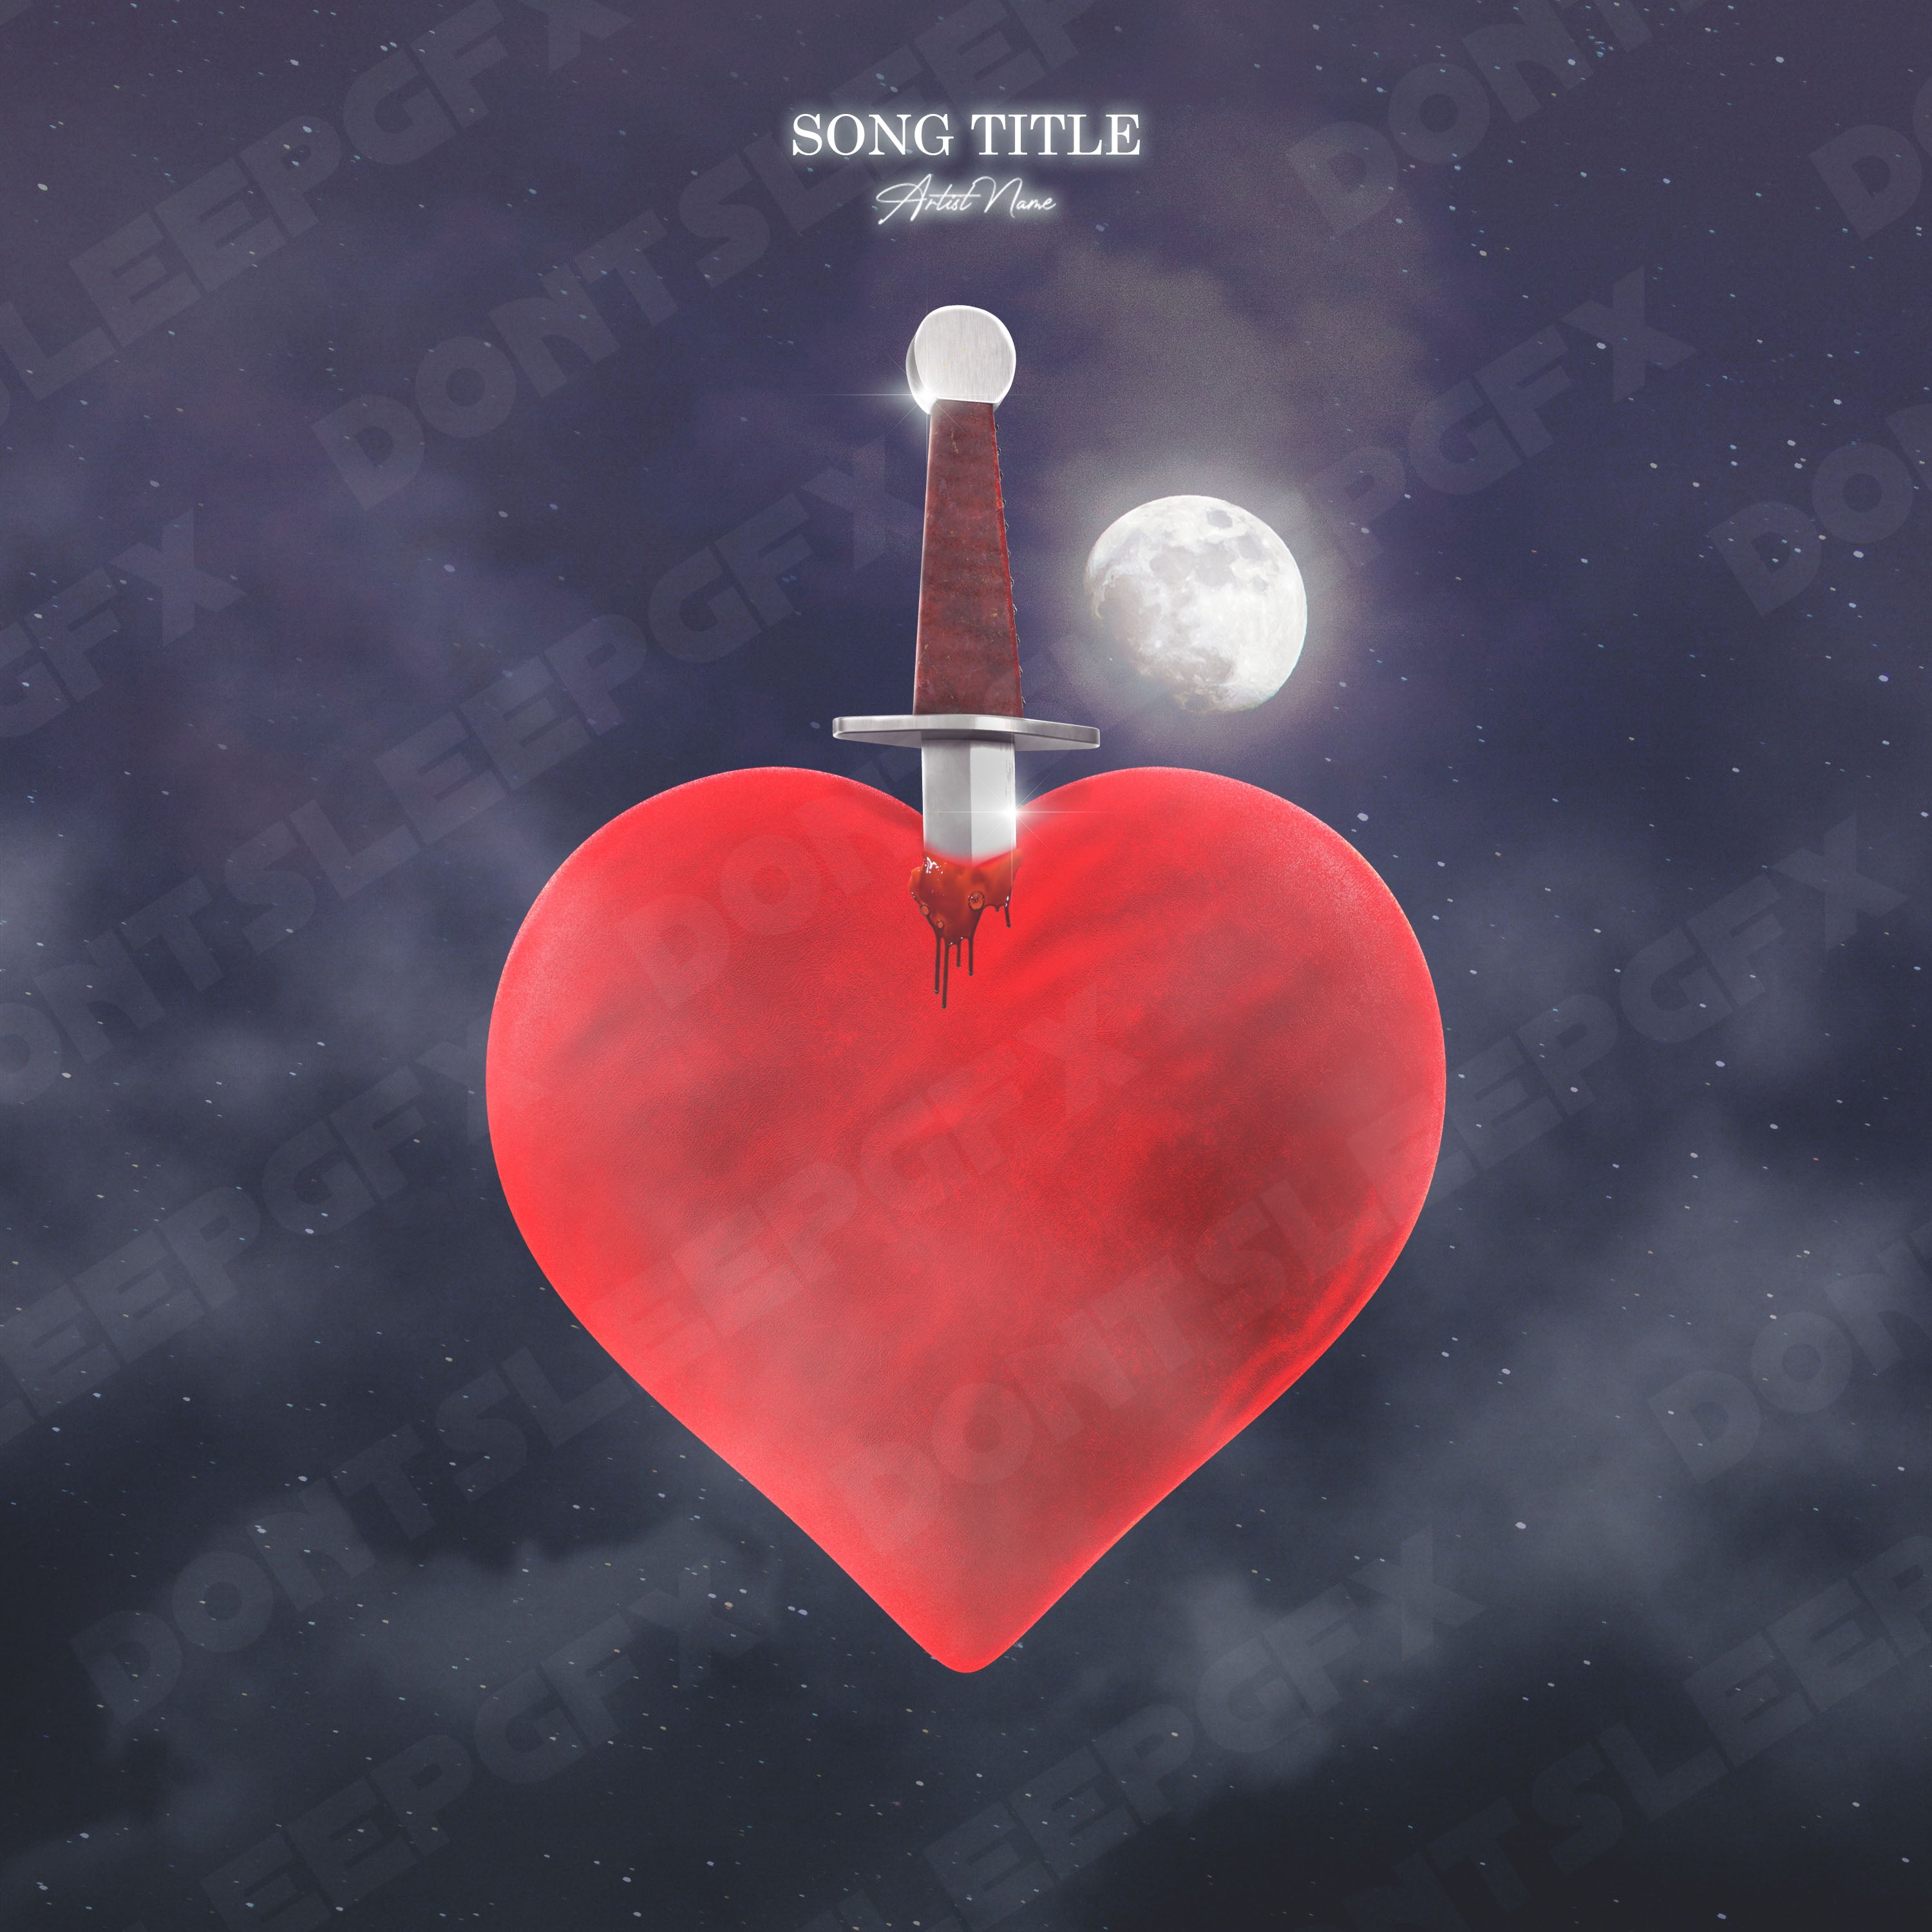 Knife Heart - Exclusive Cover Art